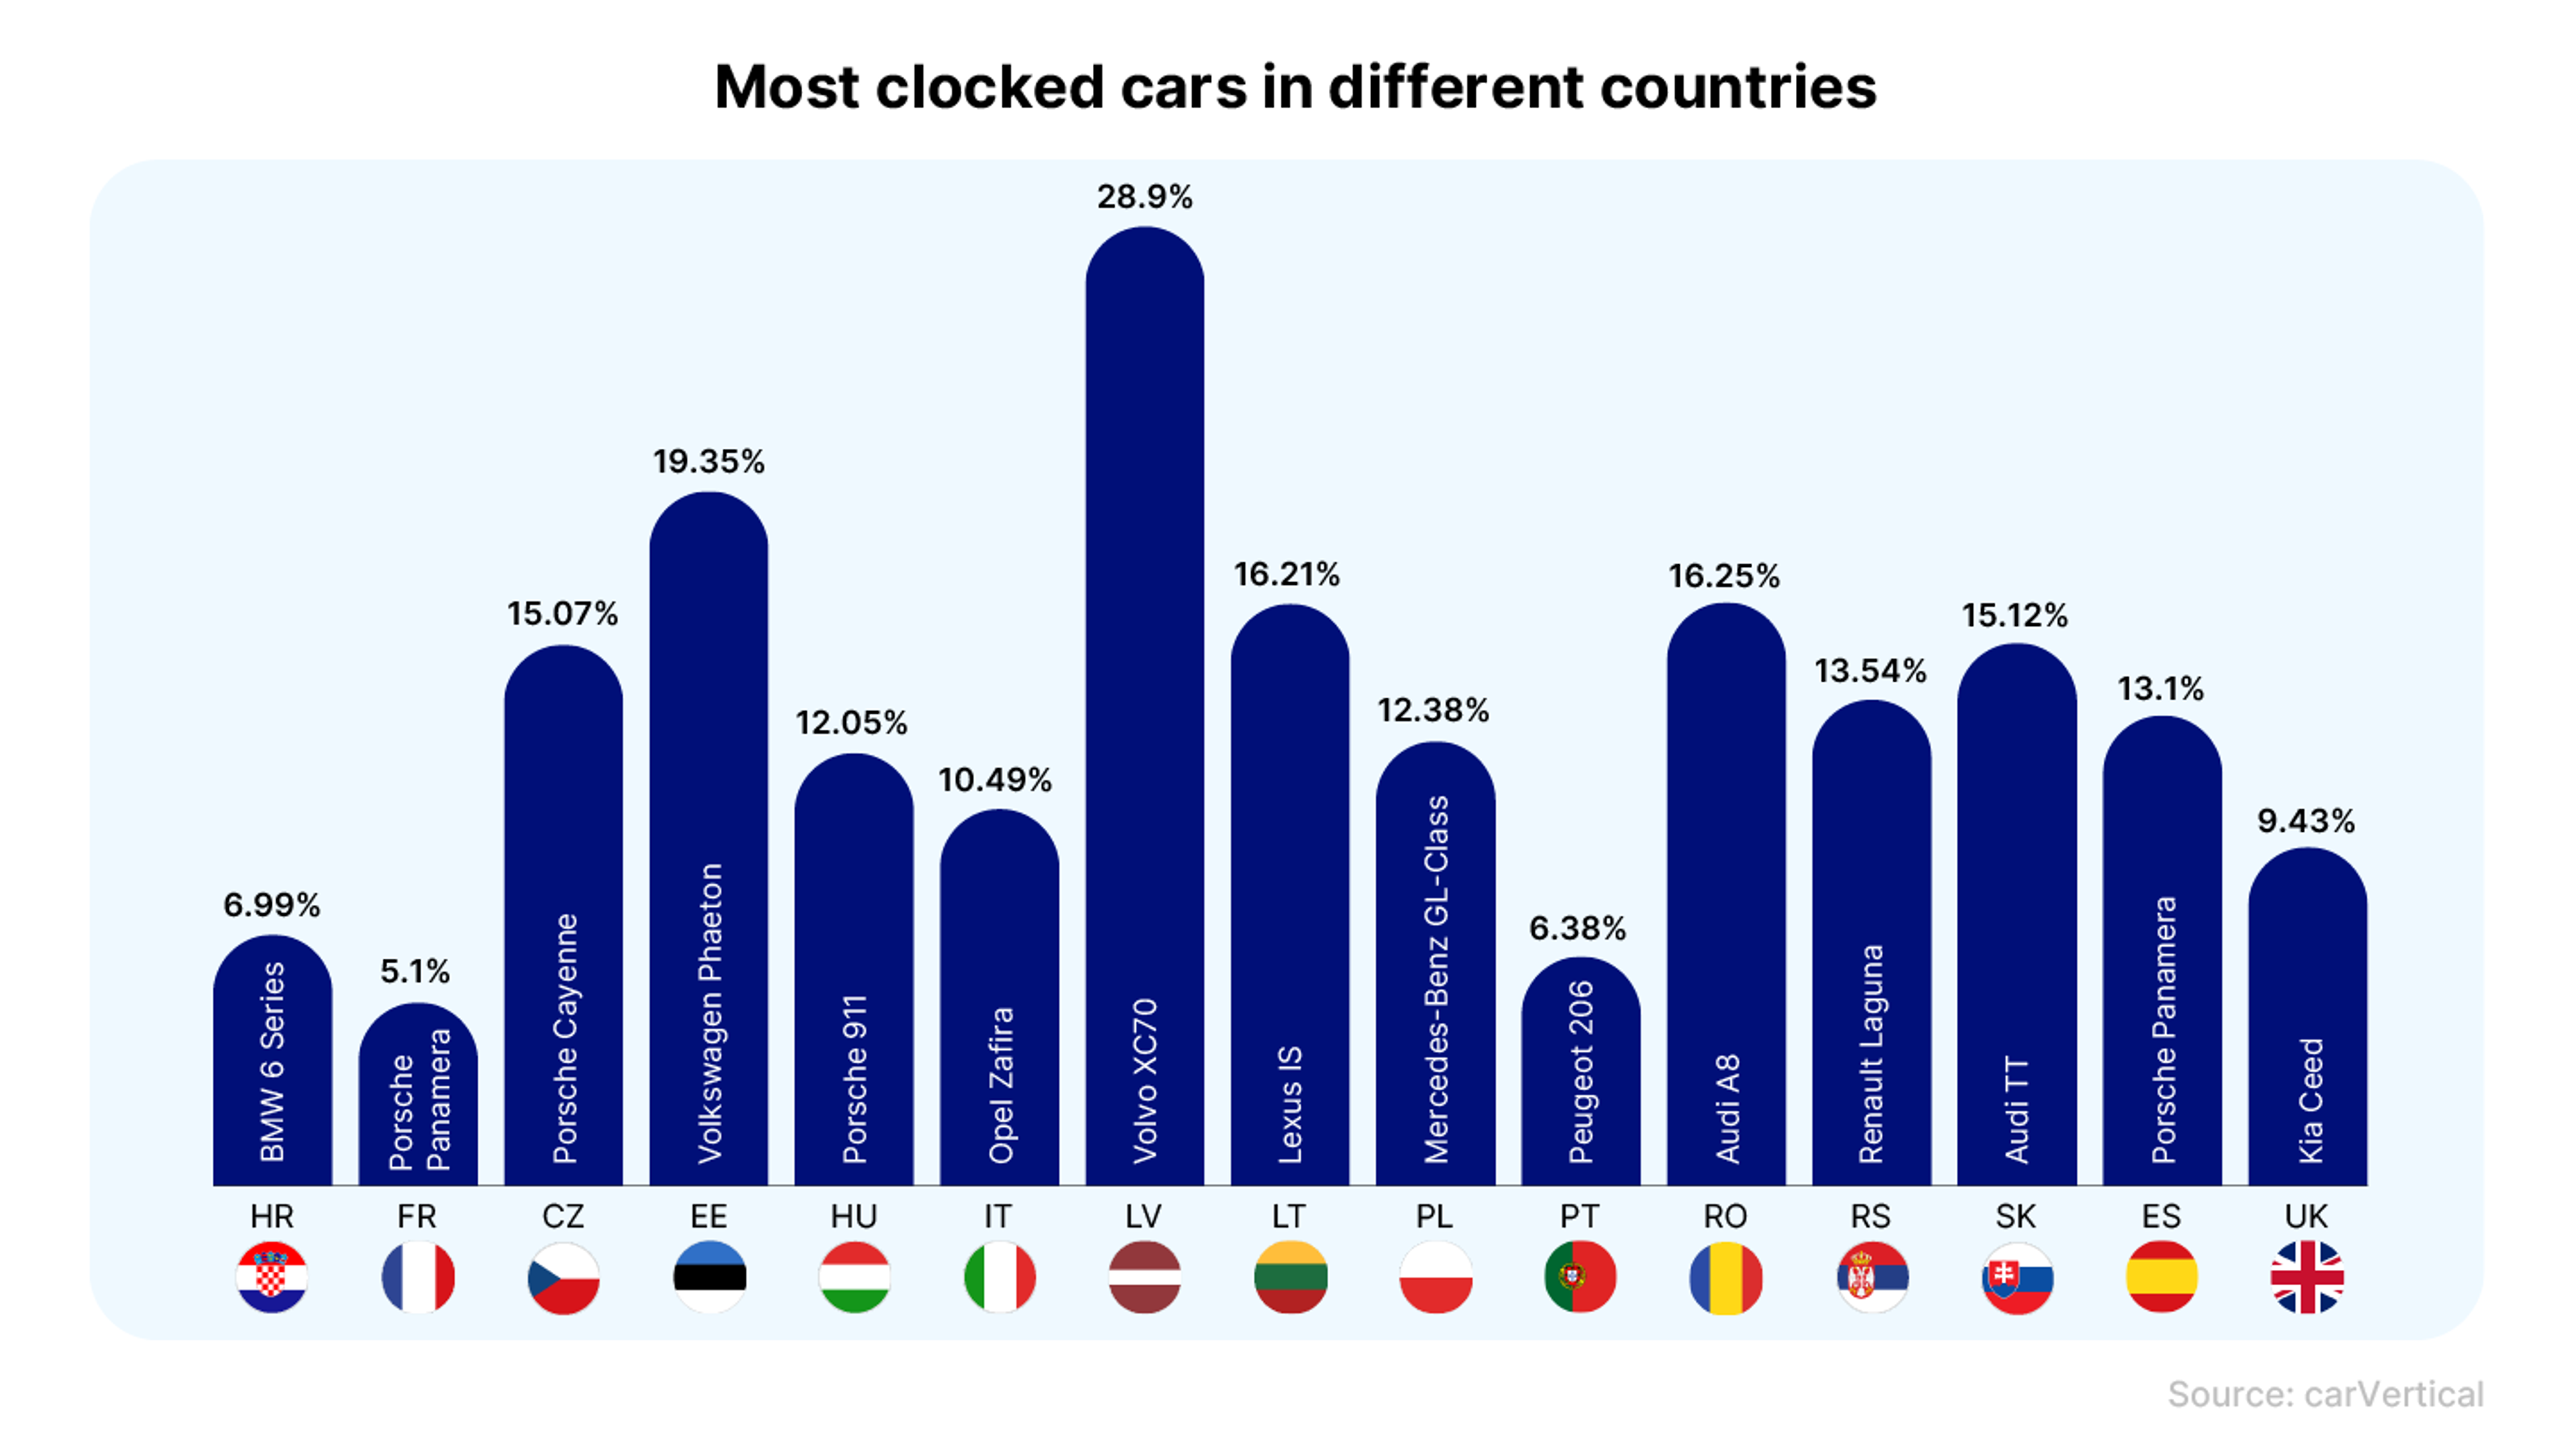 Most clocked cars in different countries